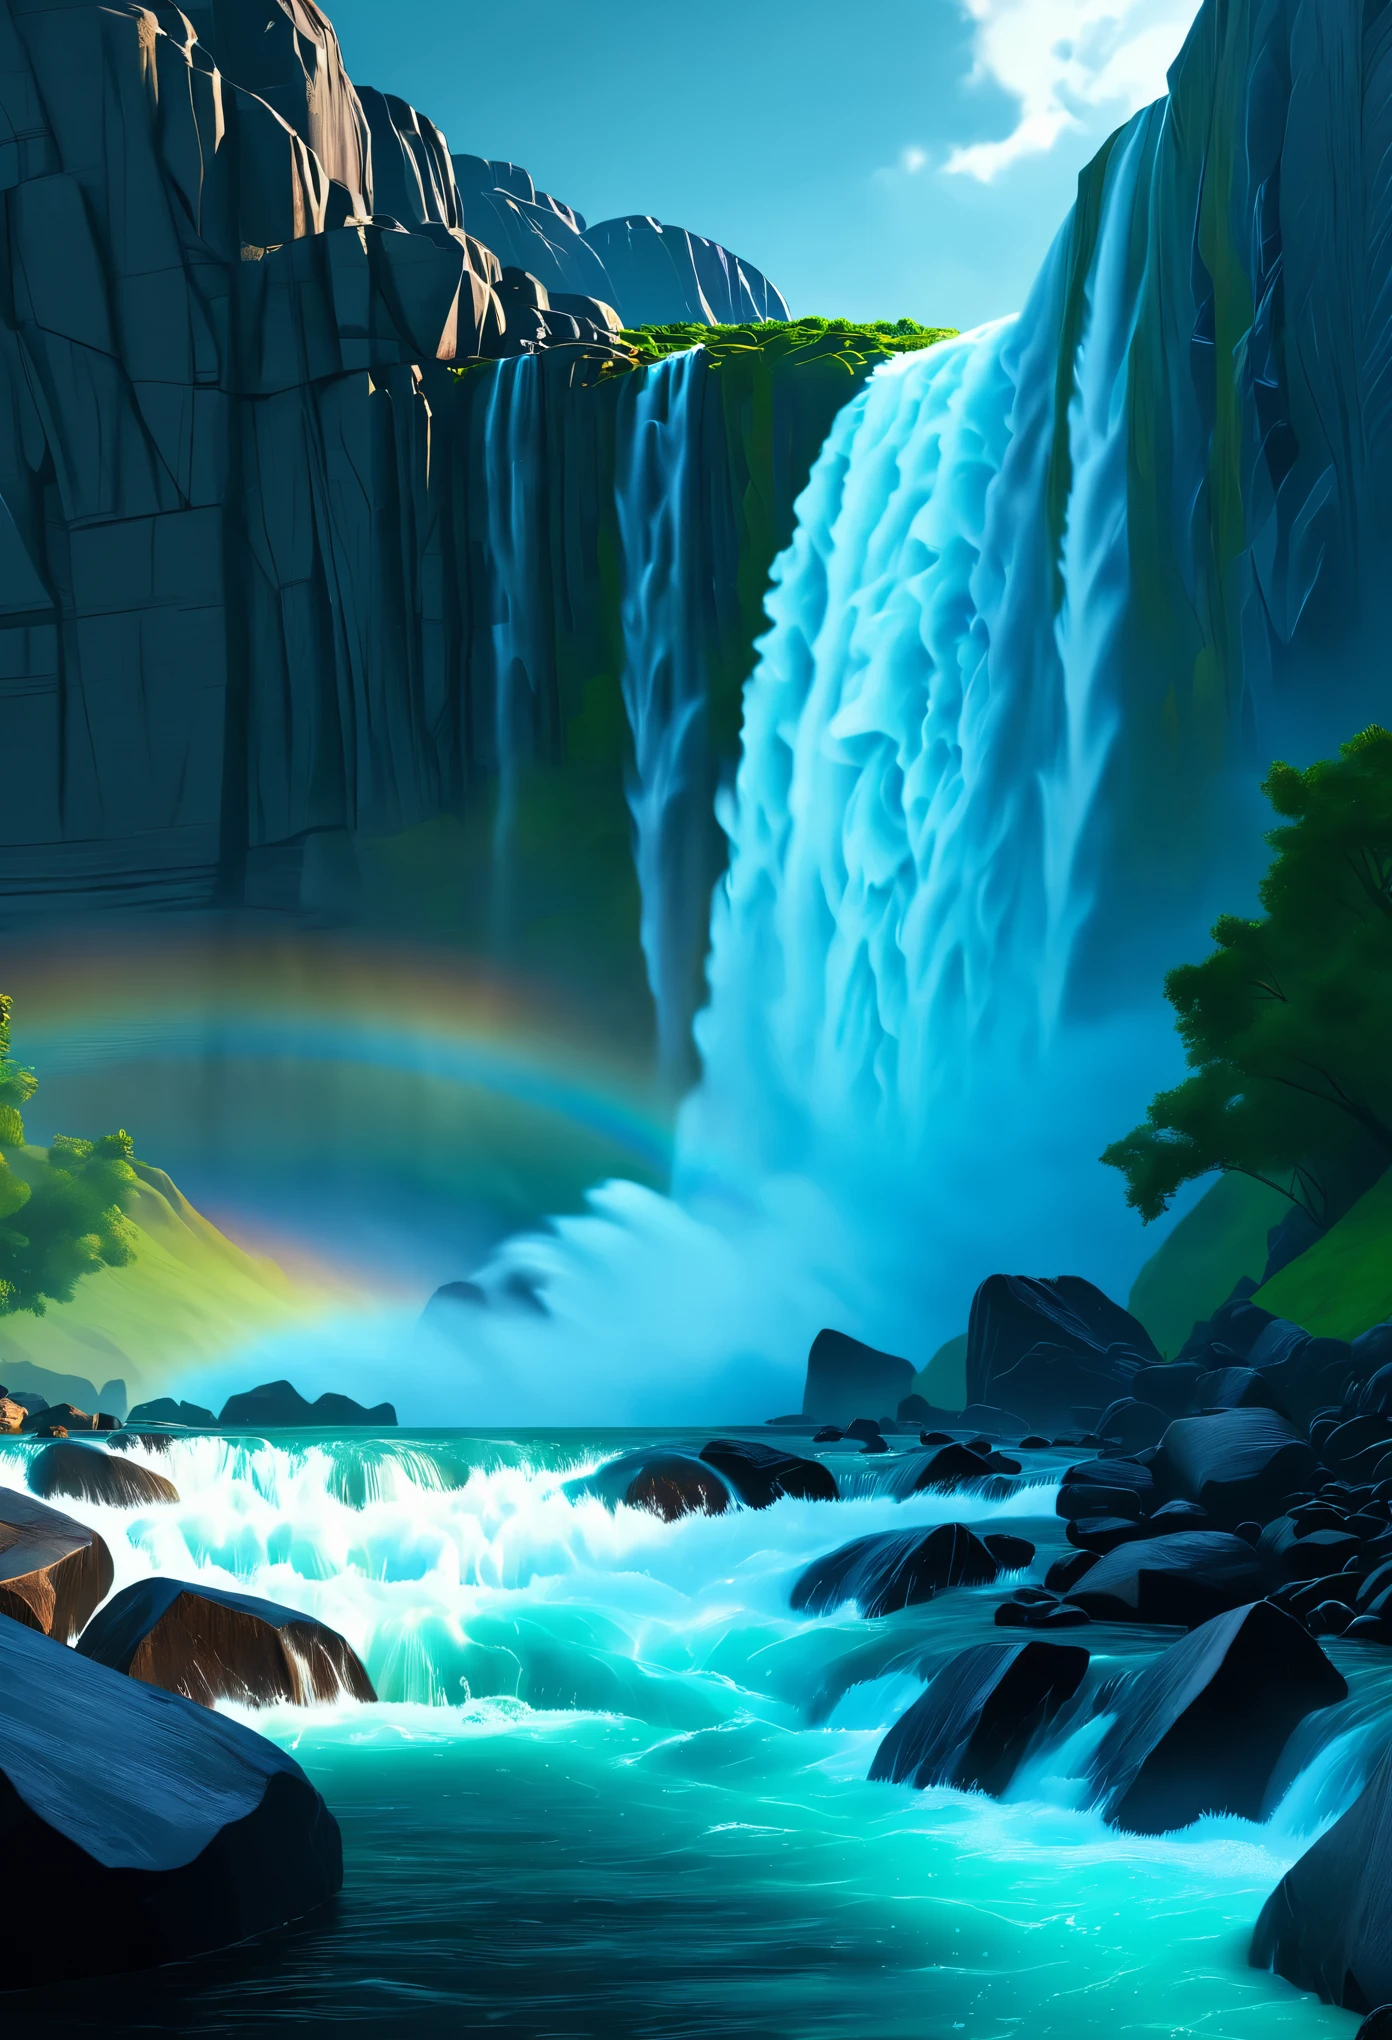 "(best quality, 4k, 8k, highres, masterpiece:1.2), ultra-detailed, (realistic, photorealistic, photo-realistic:1.37), monumental waterfall, oil painting, dramatic, powerful, roaring, cascading, thunderous, mountains collapsing, seas pouring out, awe-inspiring, dynamic, shimmering rainbows, mist, spray of water droplets, rocks and boulders, lush vegetation, HDR, studio lighting, vibrant colors, warm and cool tones, interplay between light and shadow."